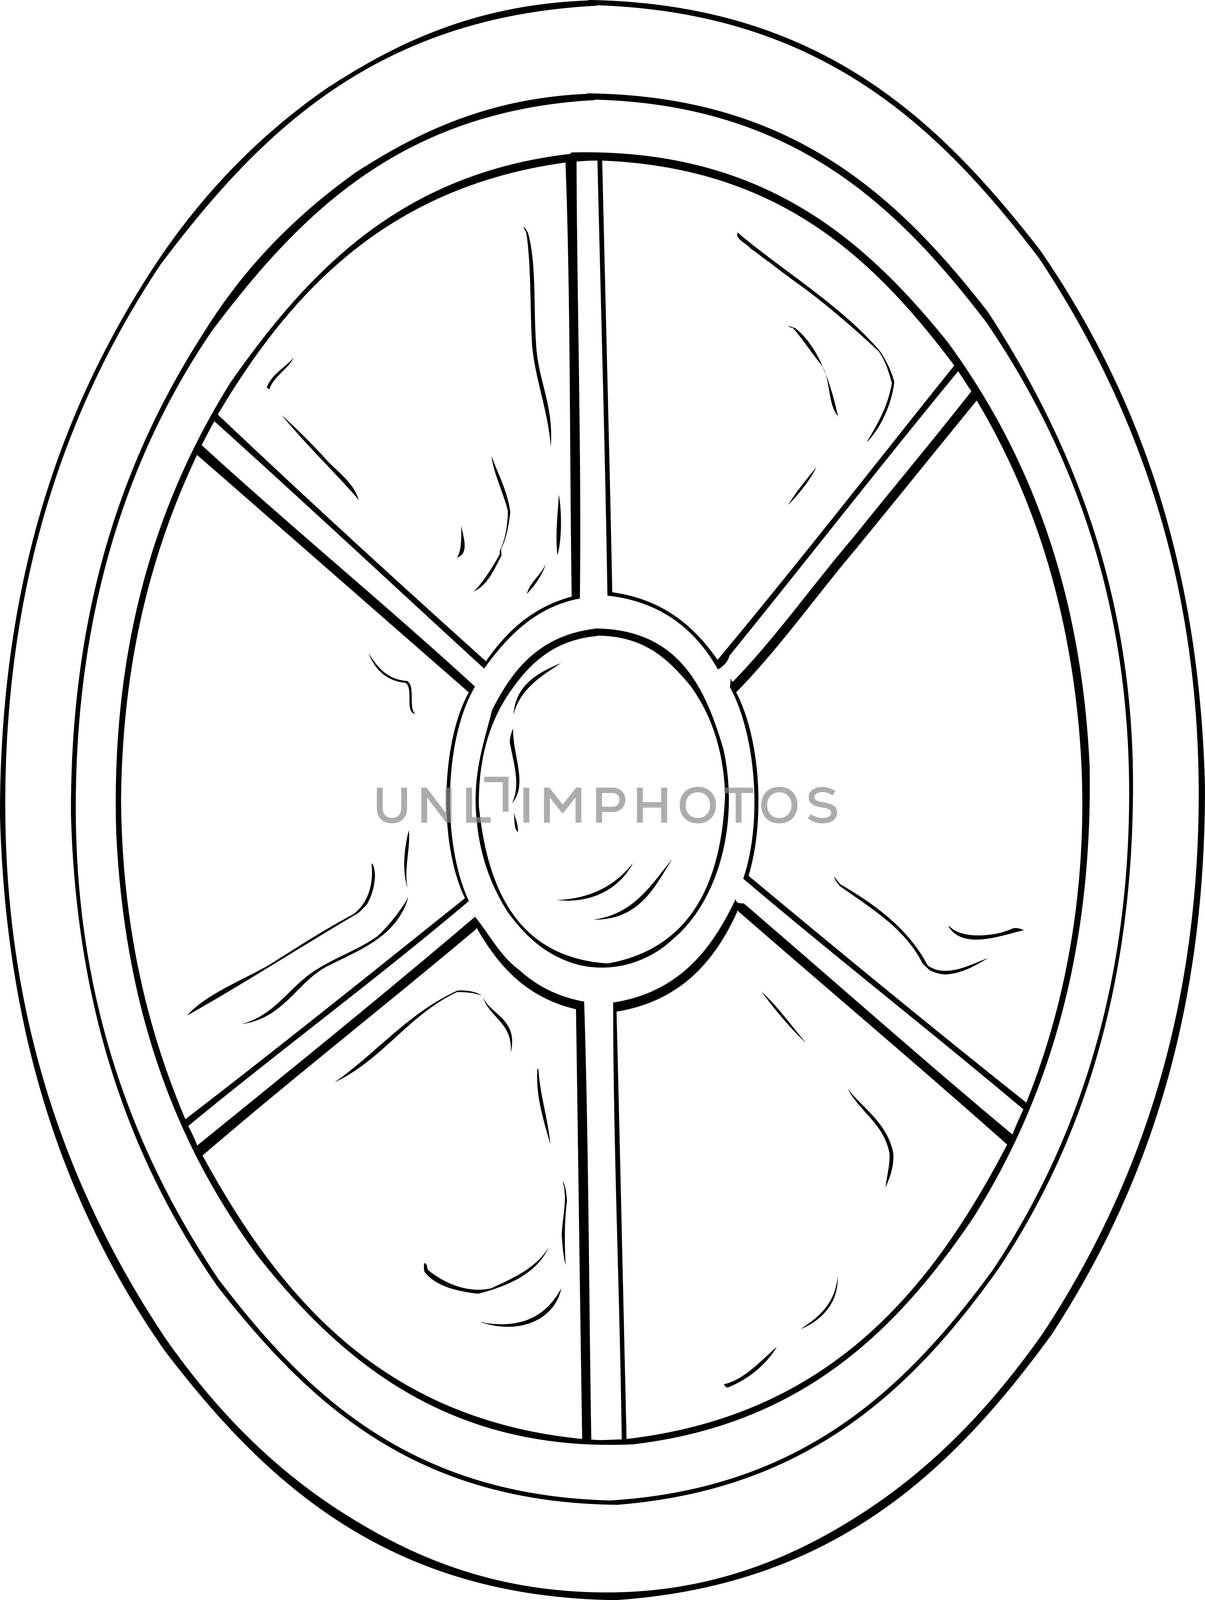 Outlined oval shaped 18th century neoclassical glass window illustration over white